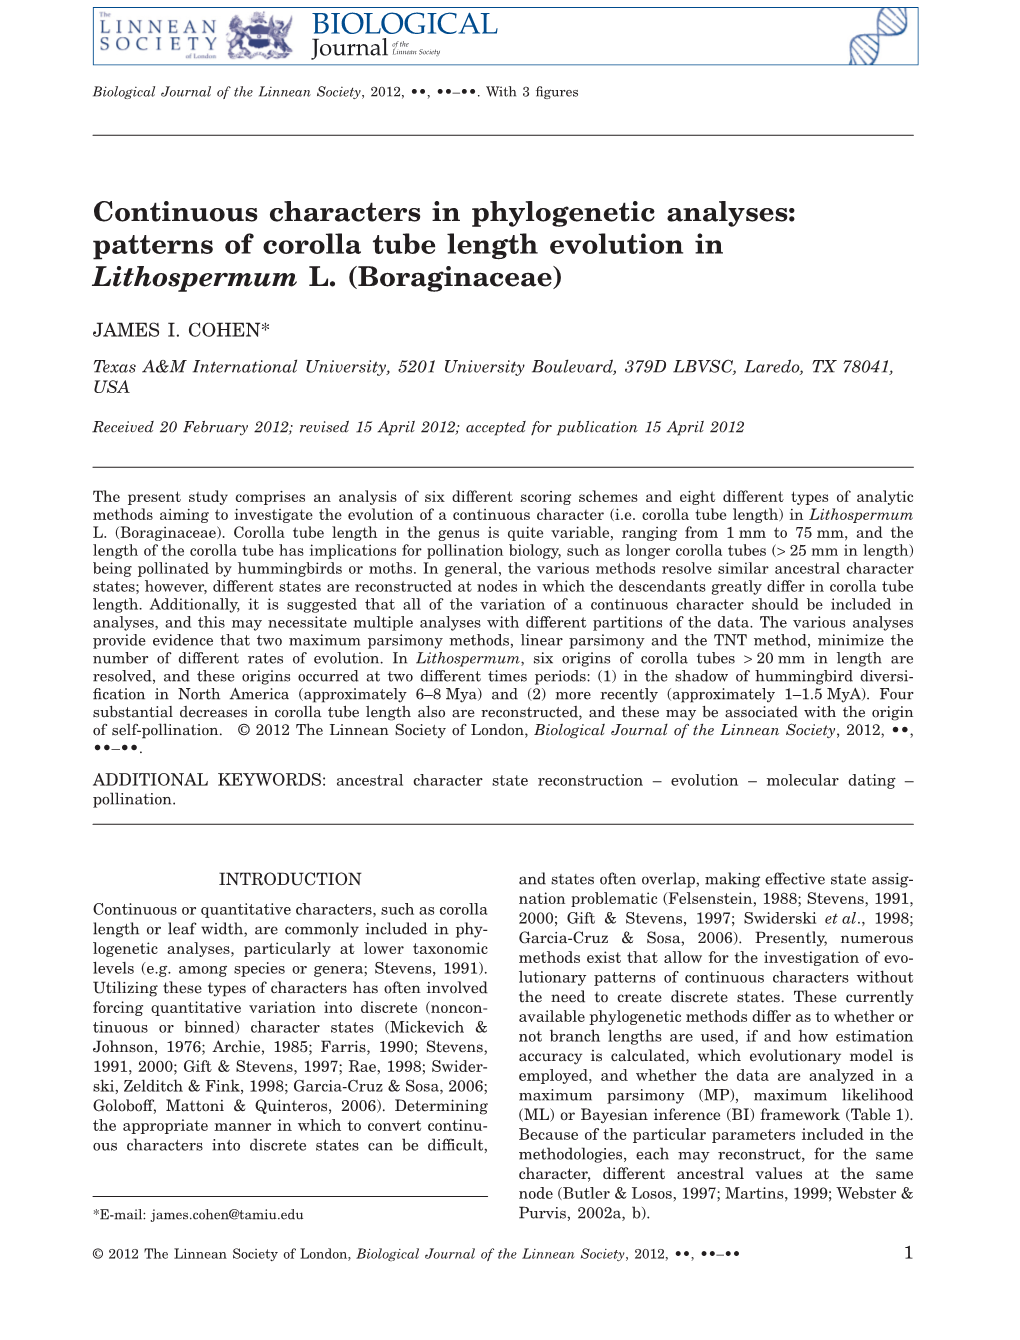 Continuous Characters in Phylogenetic Analyses: Patterns of Corolla Tube Length Evolution in Lithospermum L